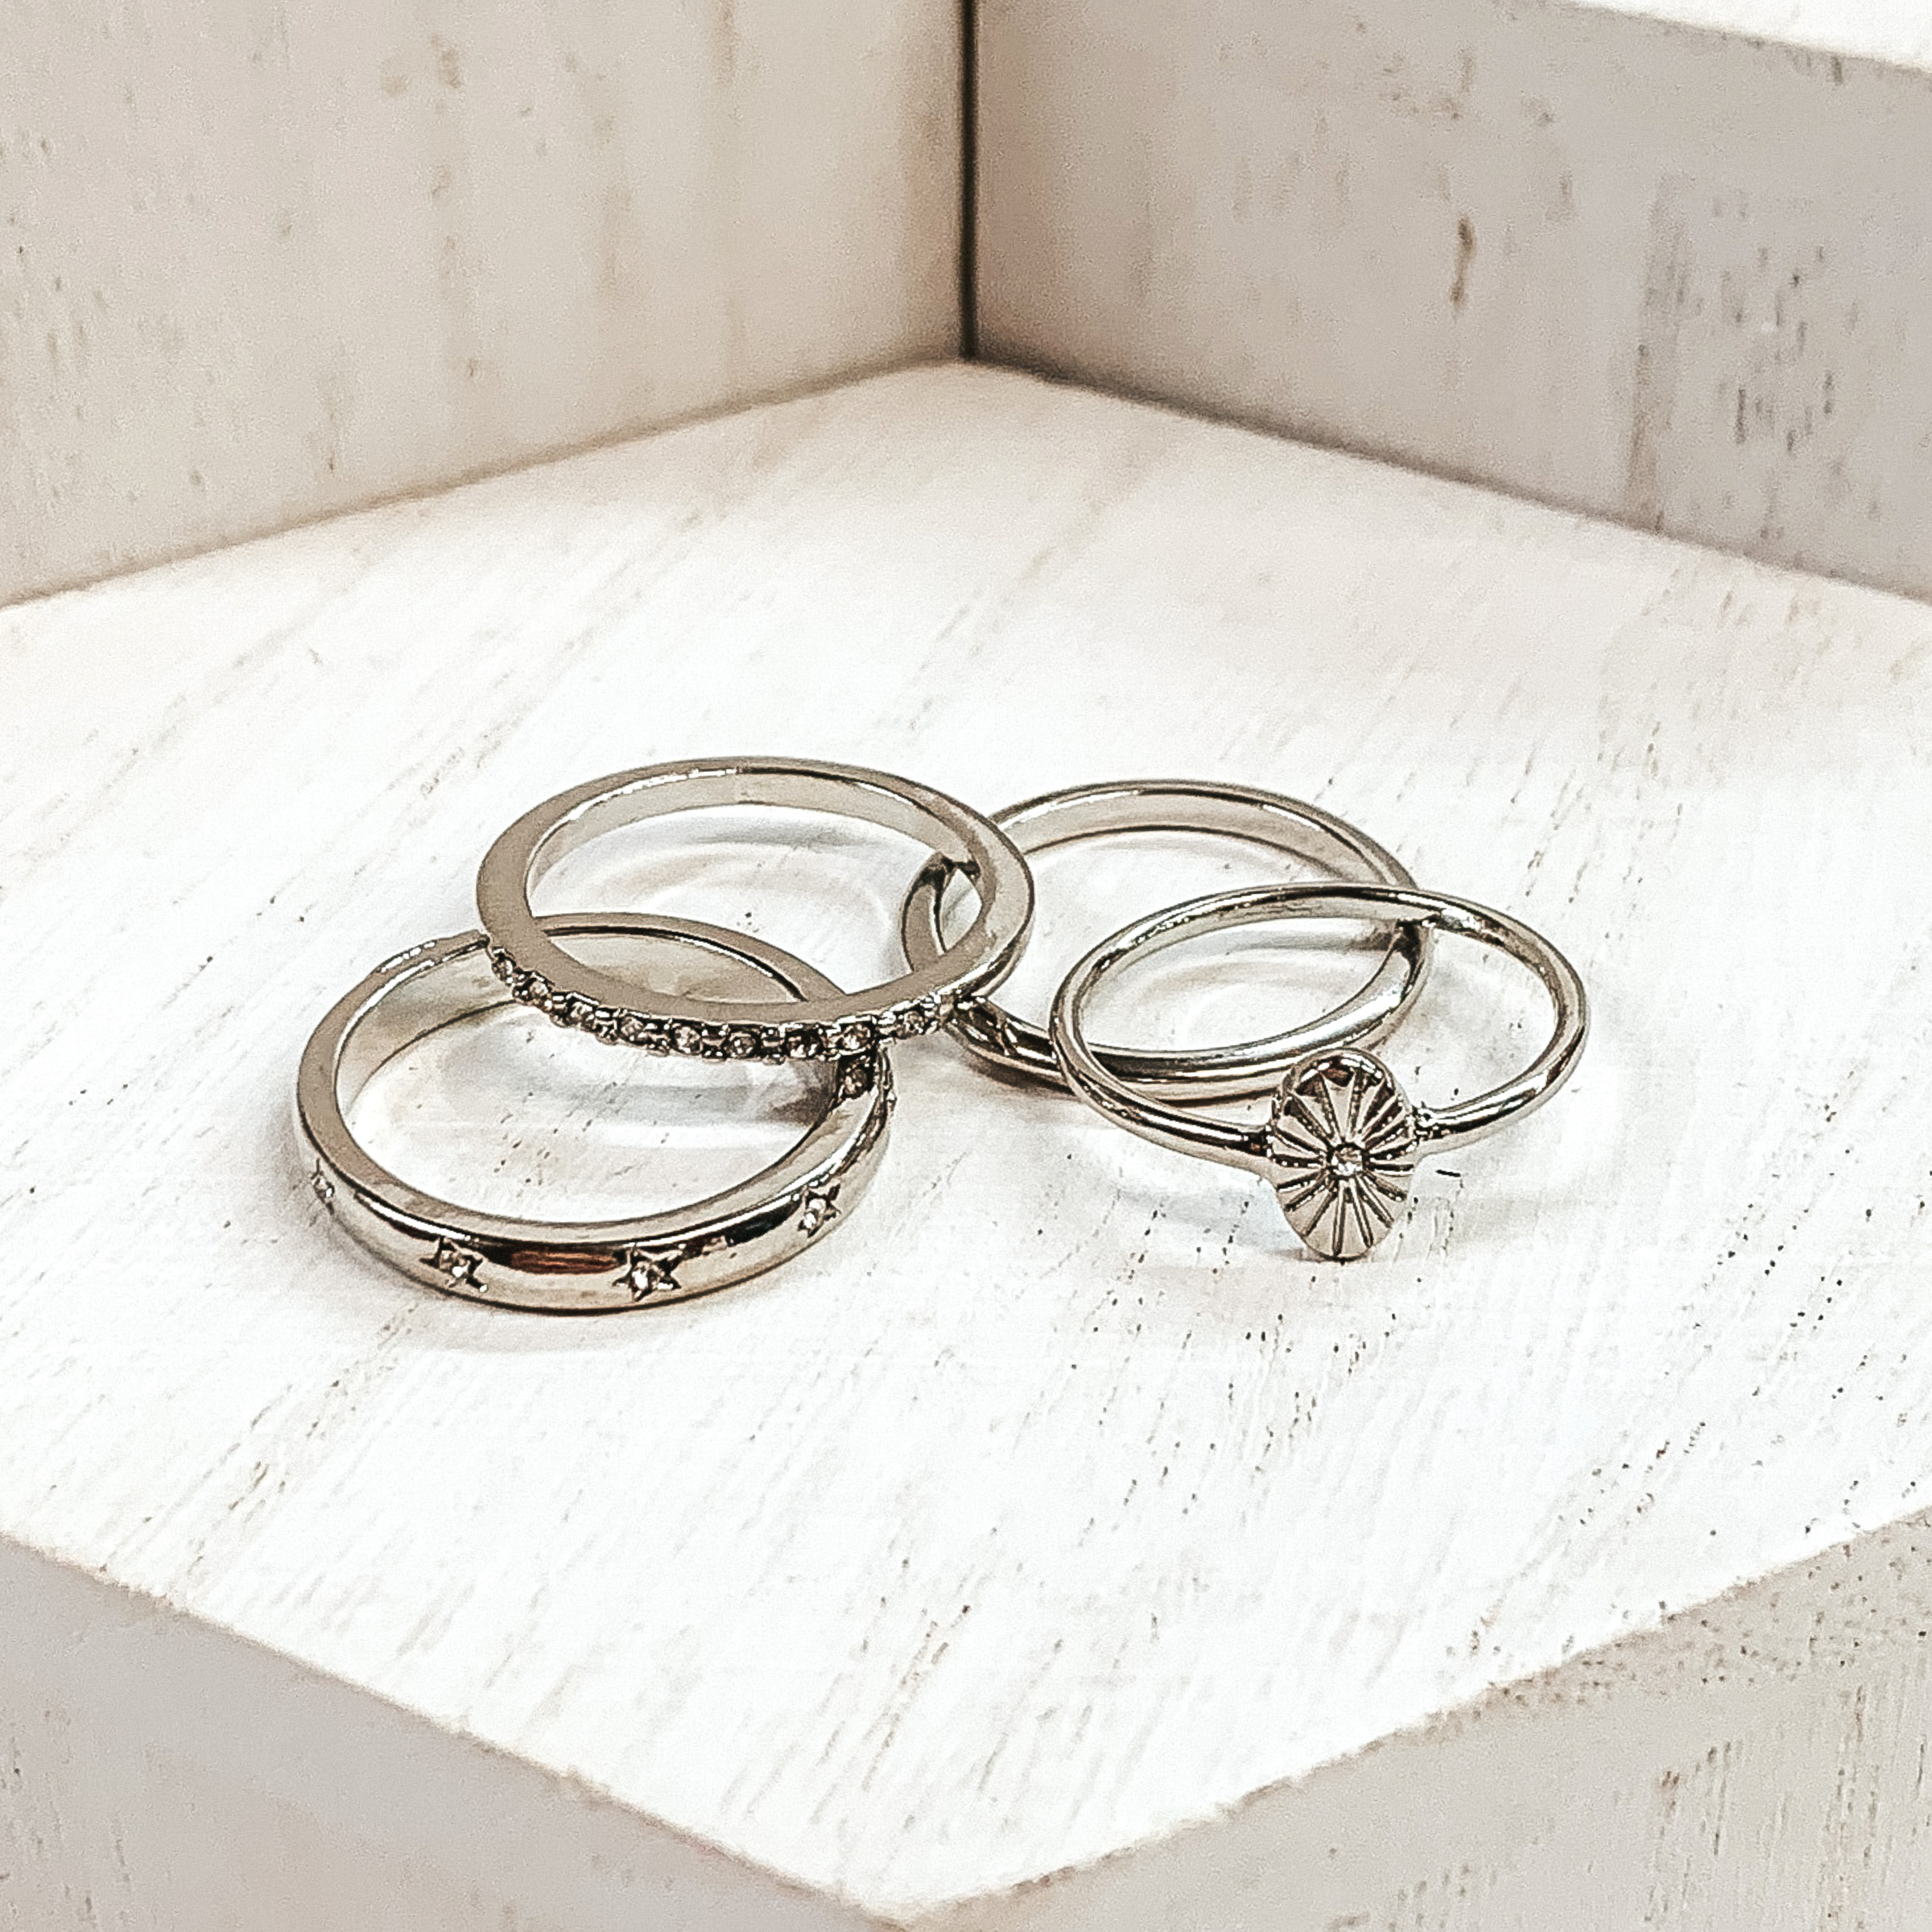 Set of silver rings pictured on white blocks. One ring has an oval pendant, one is a plain band, another ring has clear crystals, and the last ring has tiny engraved stars with tiny clear crystals. 